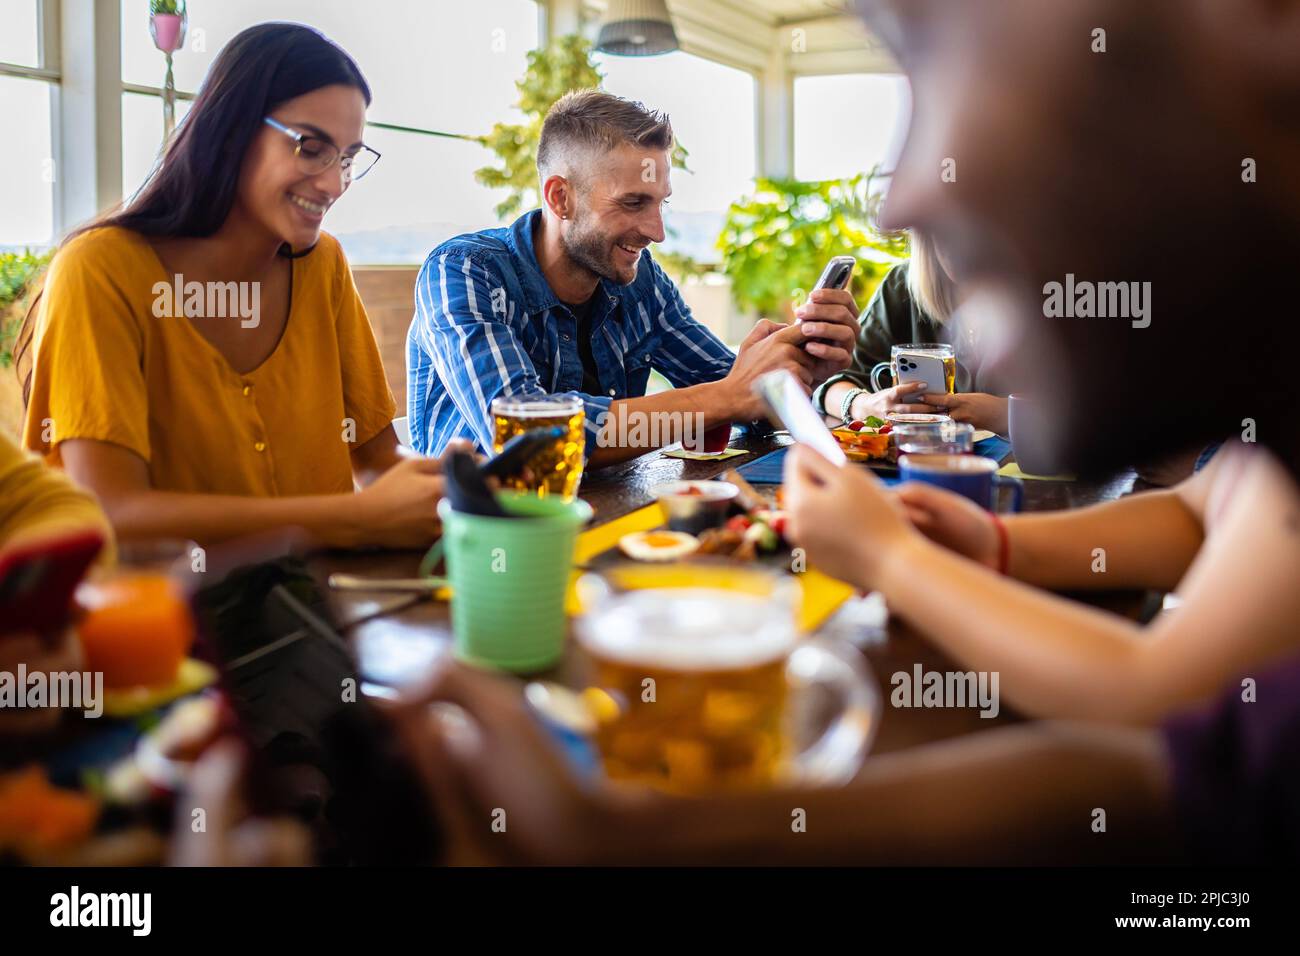 Addicted young people using mobile phone devices sitting at restaurant table Stock Photo